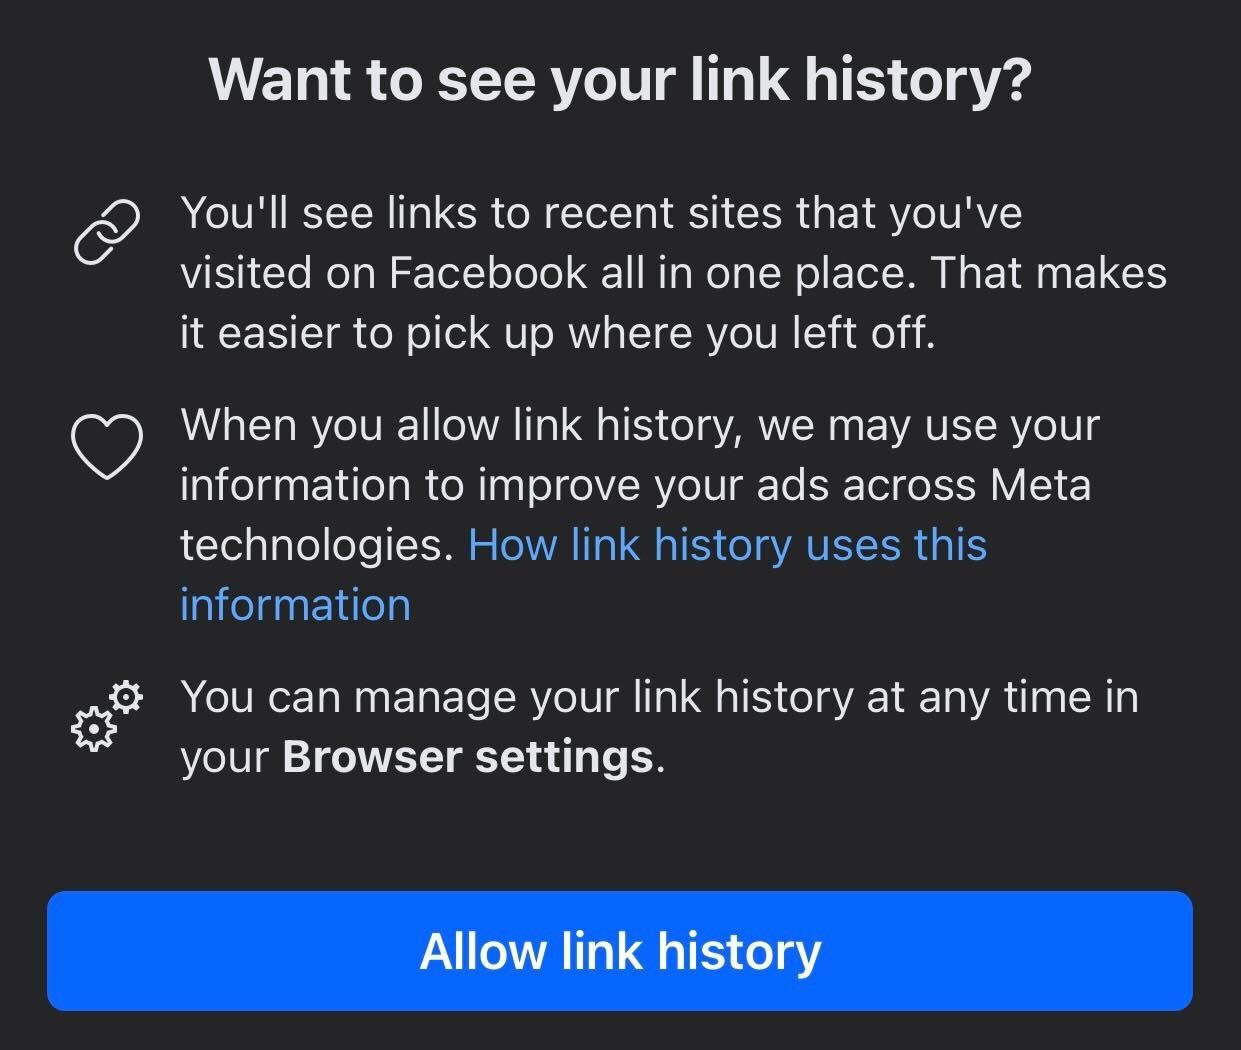 Pop-up to enable the 'Link History' on Facebook.